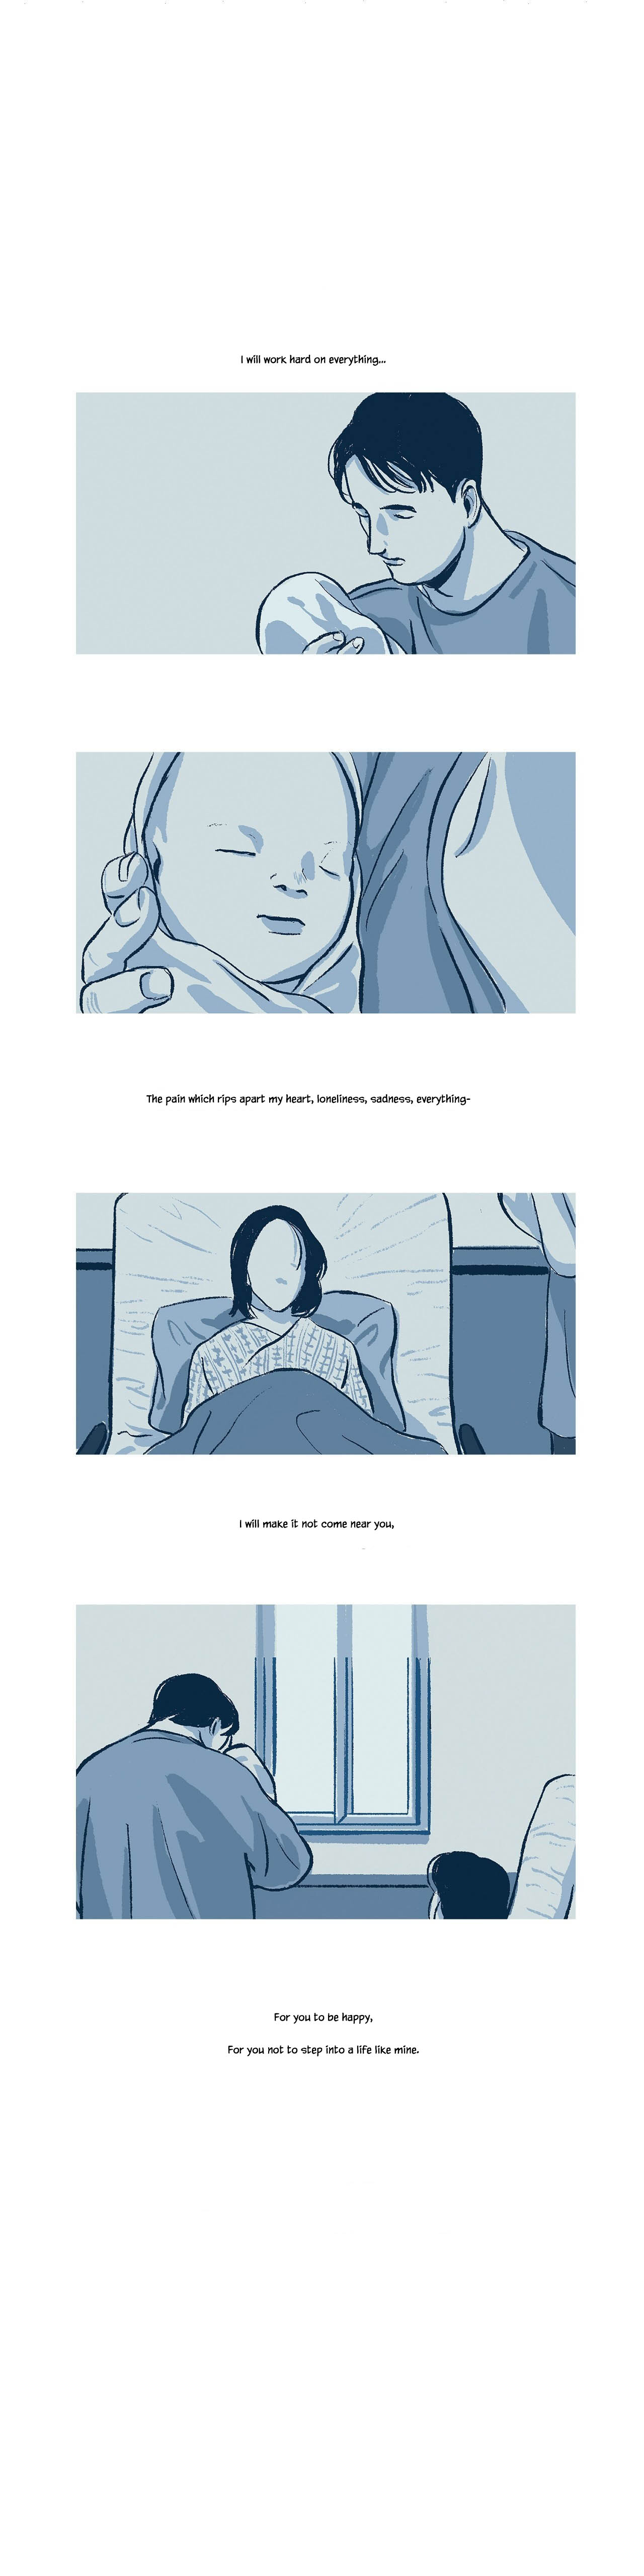 The Professor Who Reads Love Stories - Page 1